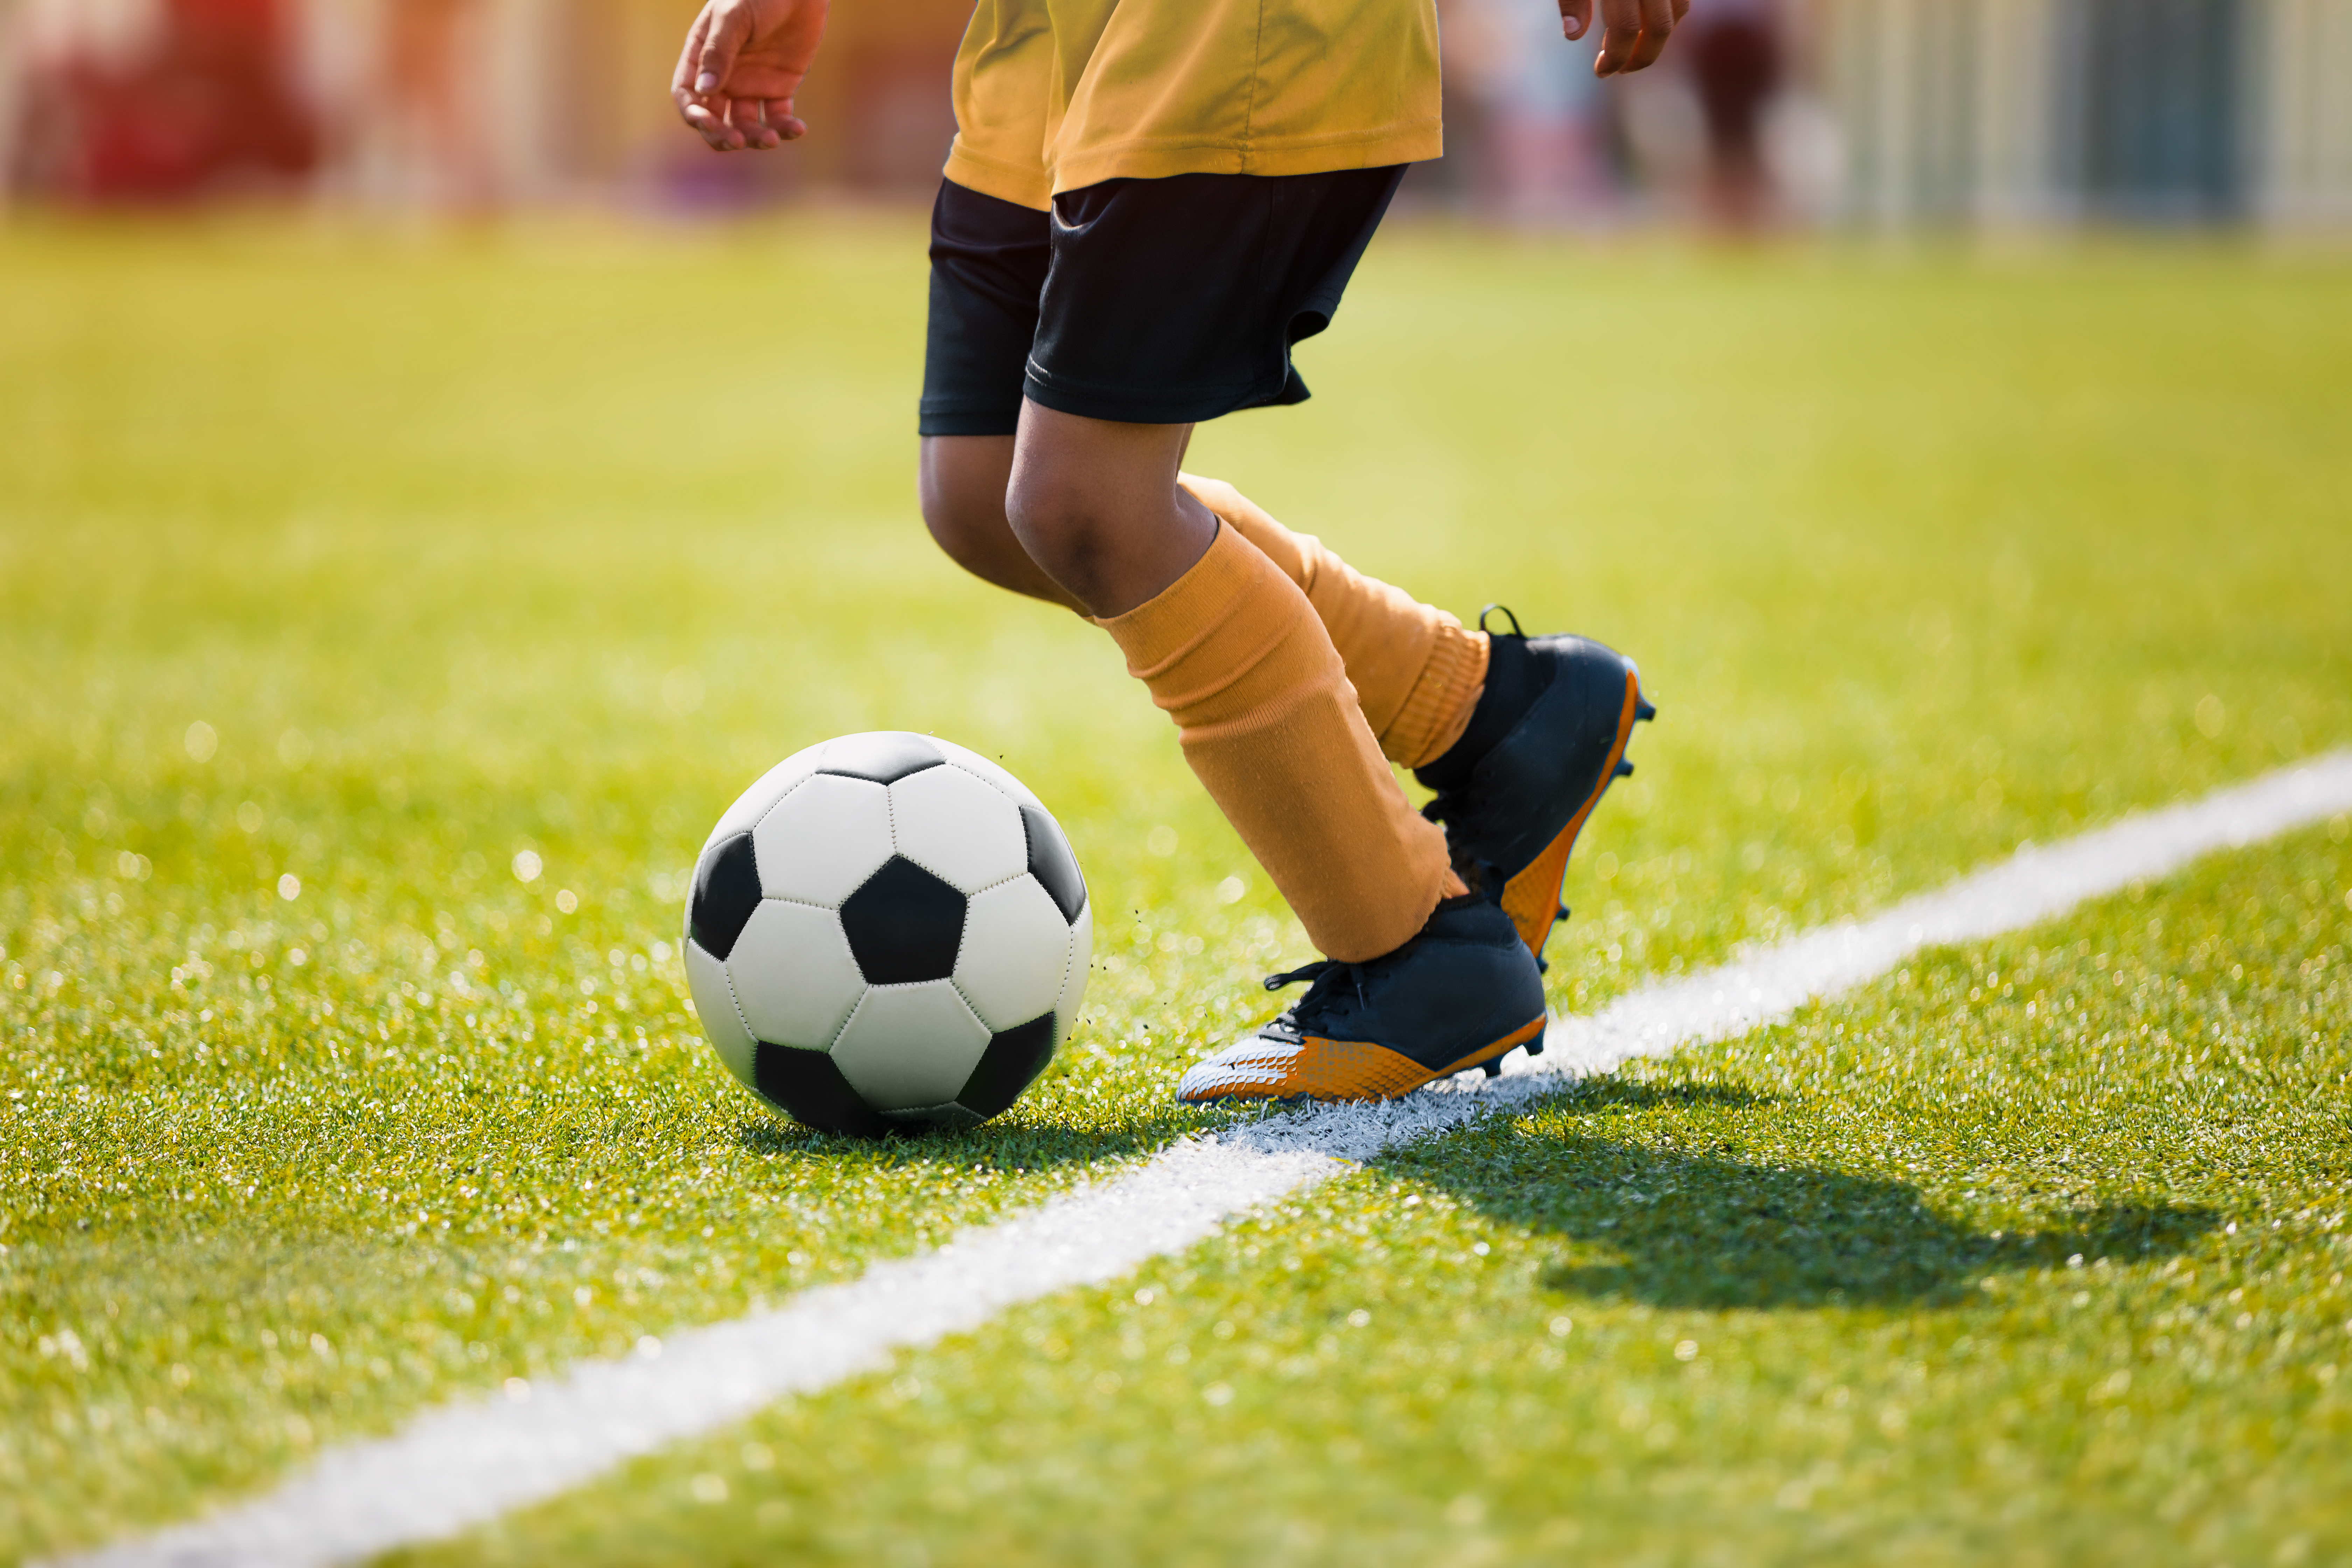 A young child playing soccer on a field | Source: Shutterstock